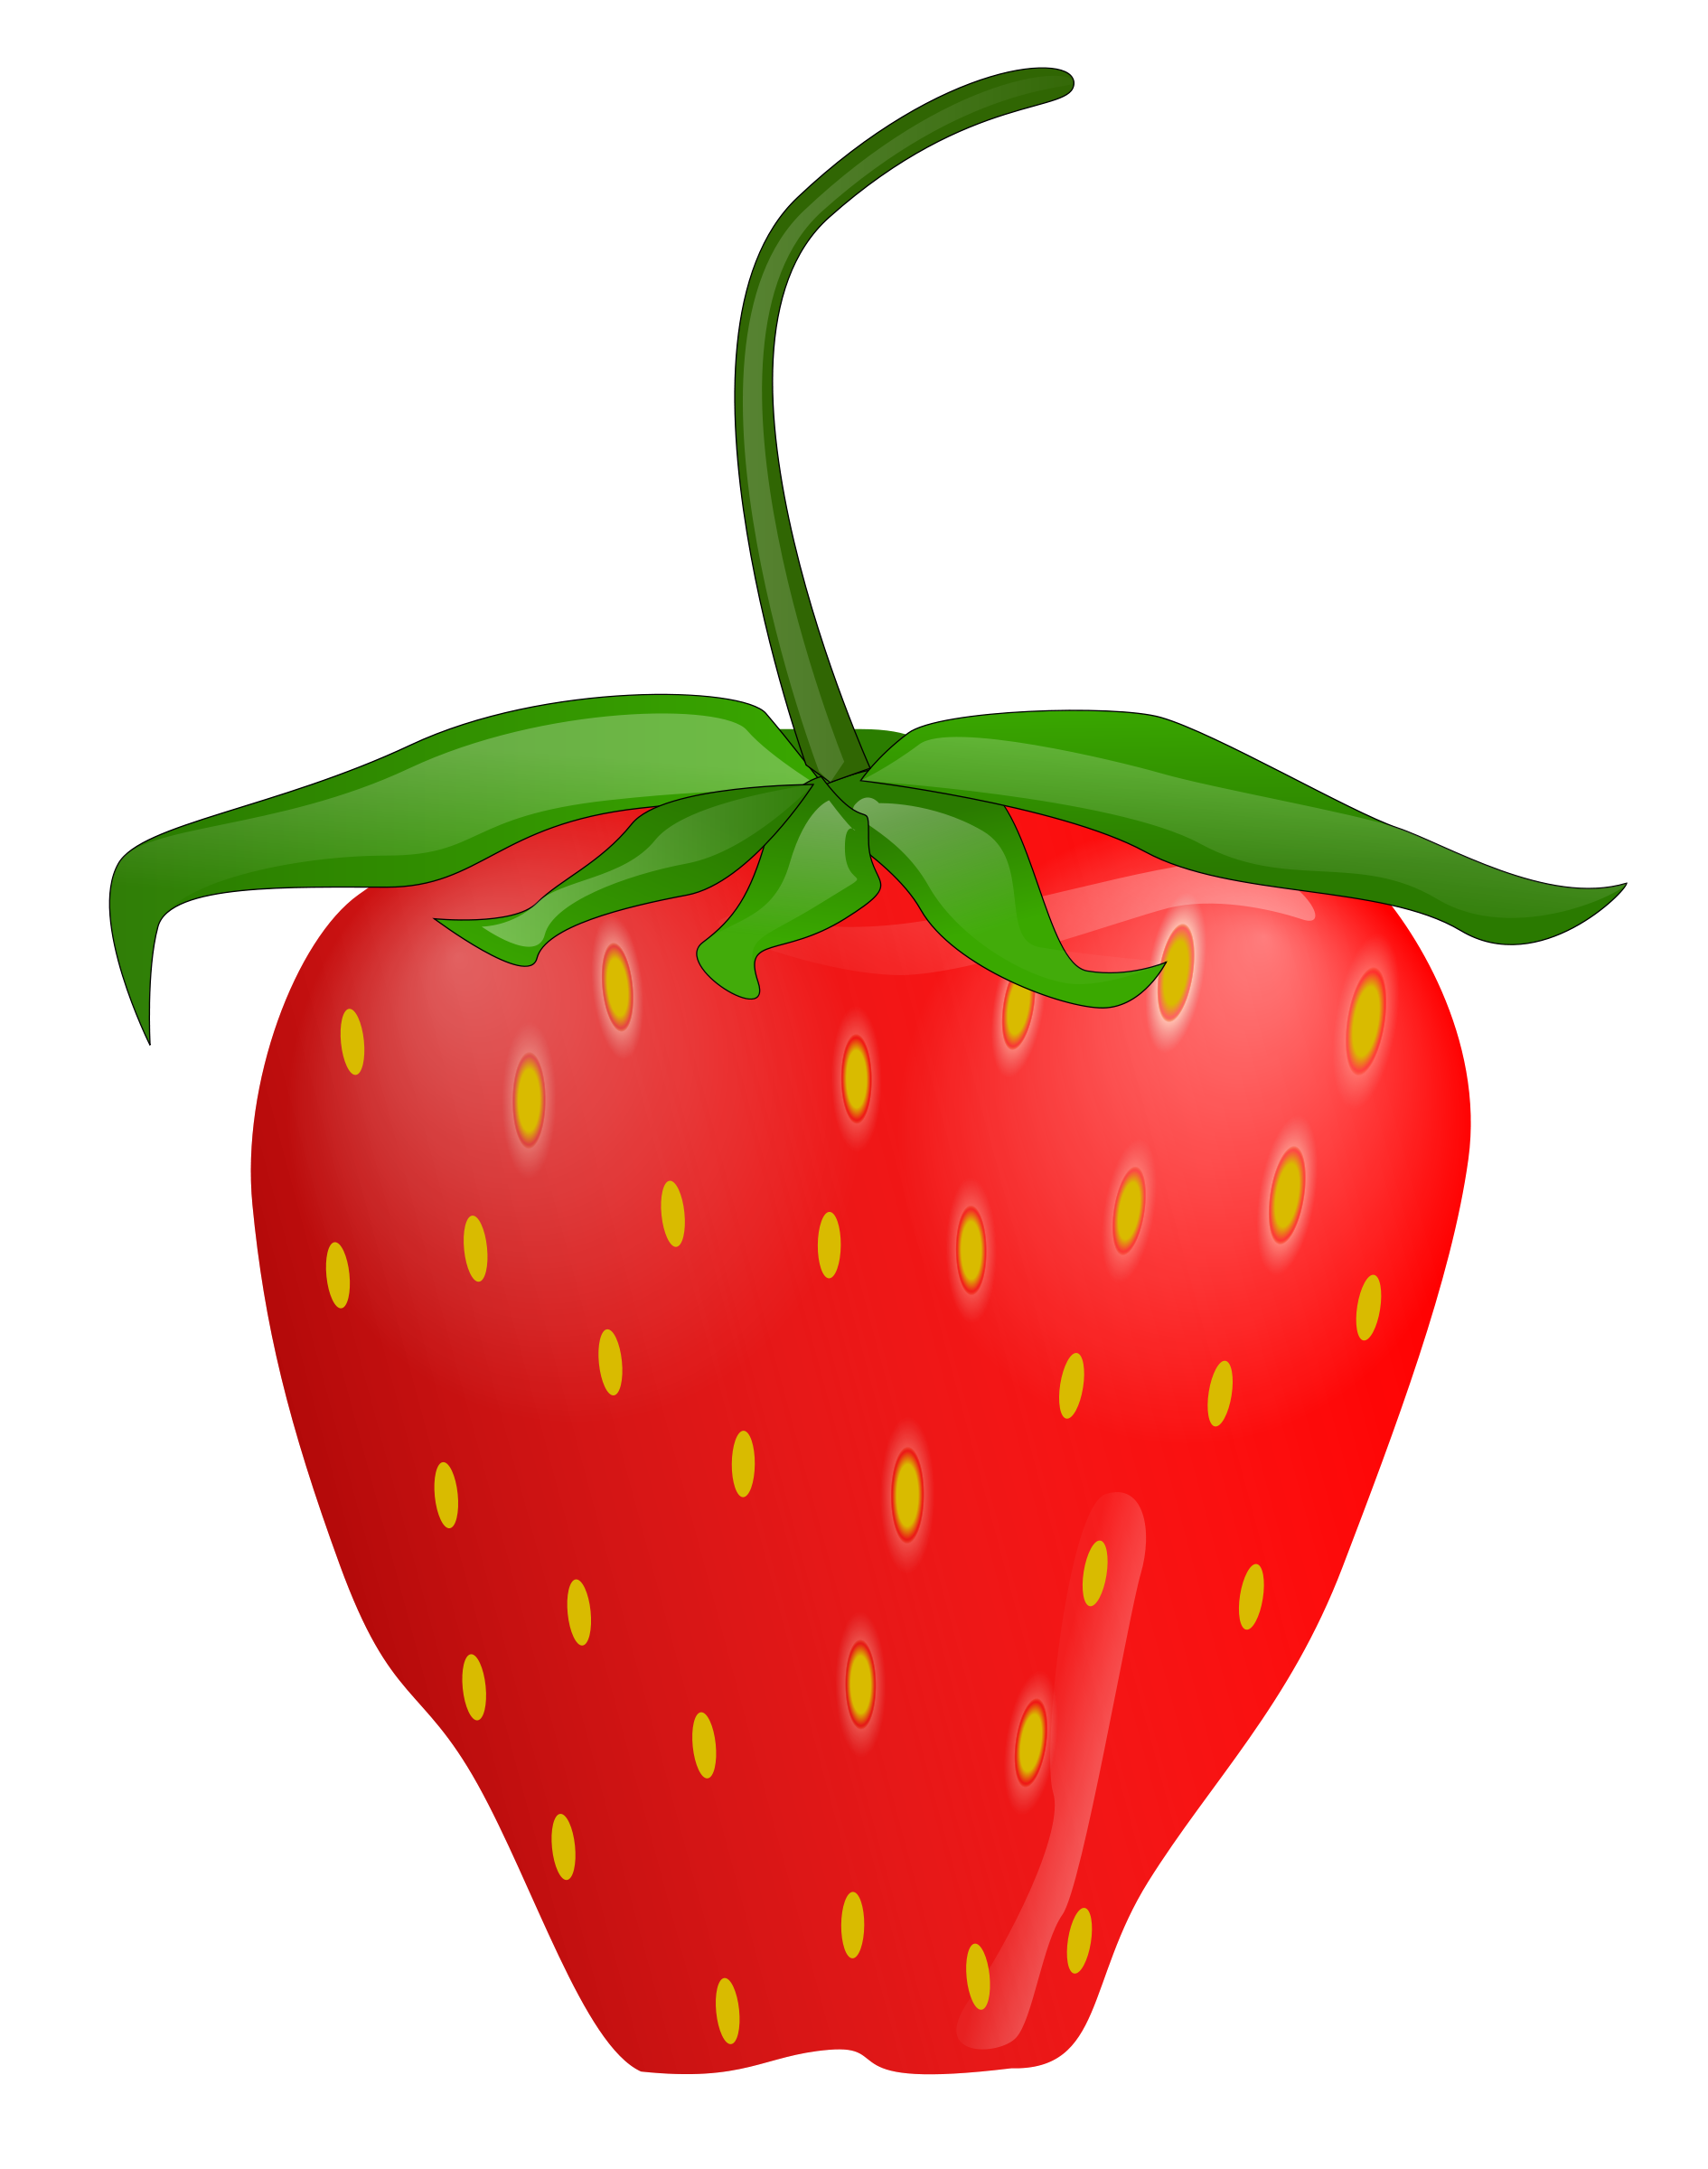 Strawberry Plant Clipart Black And White | Clipart Panda - Free ...